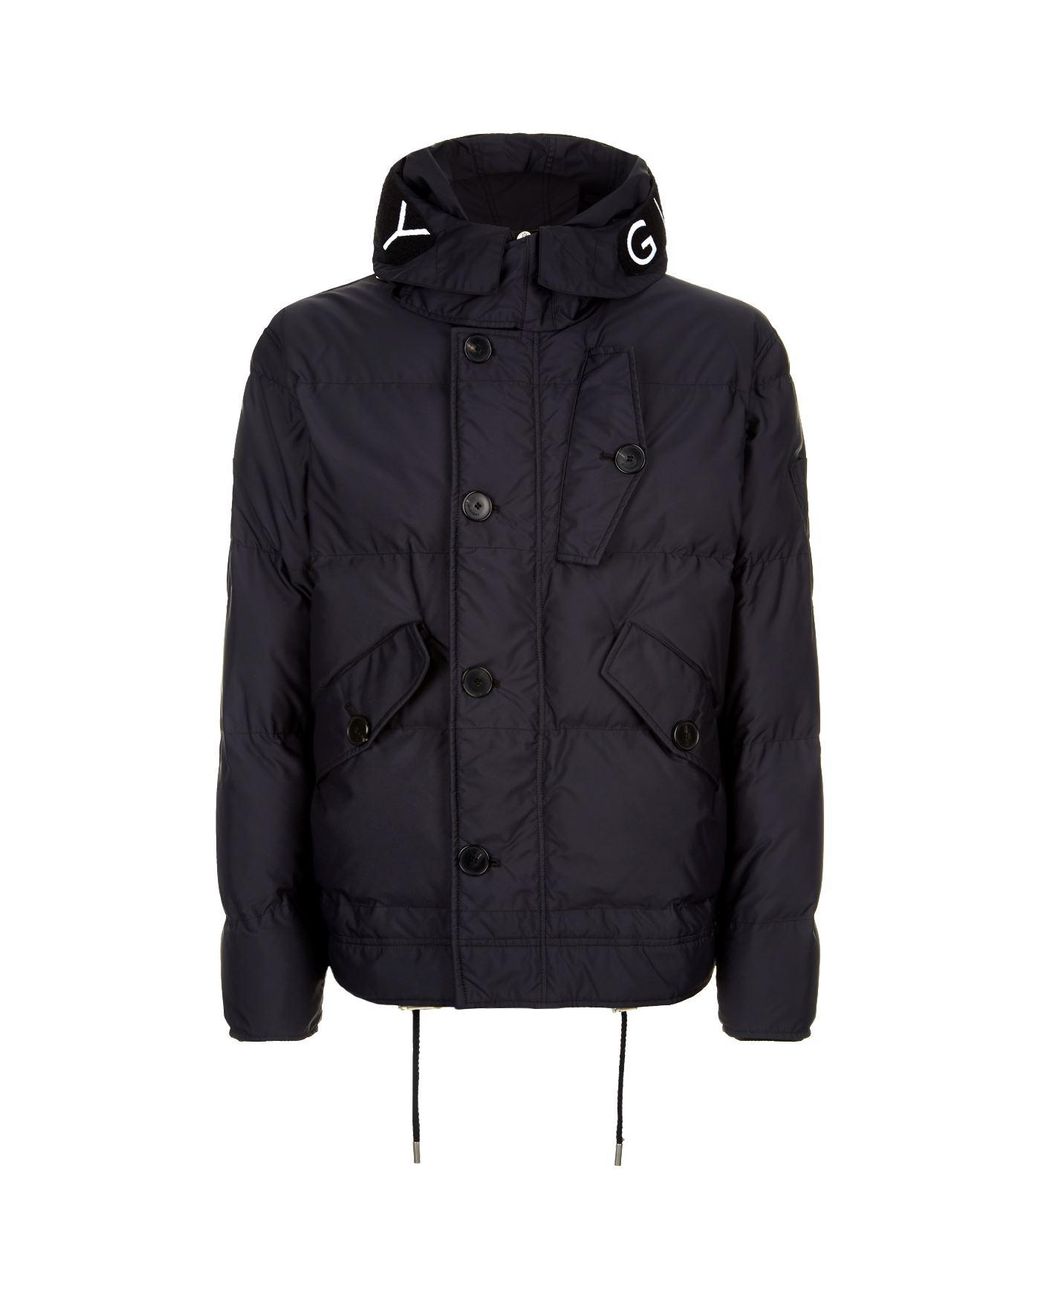 Givenchy Hooded Logo Puffer Jacket in Black for Men | Lyst